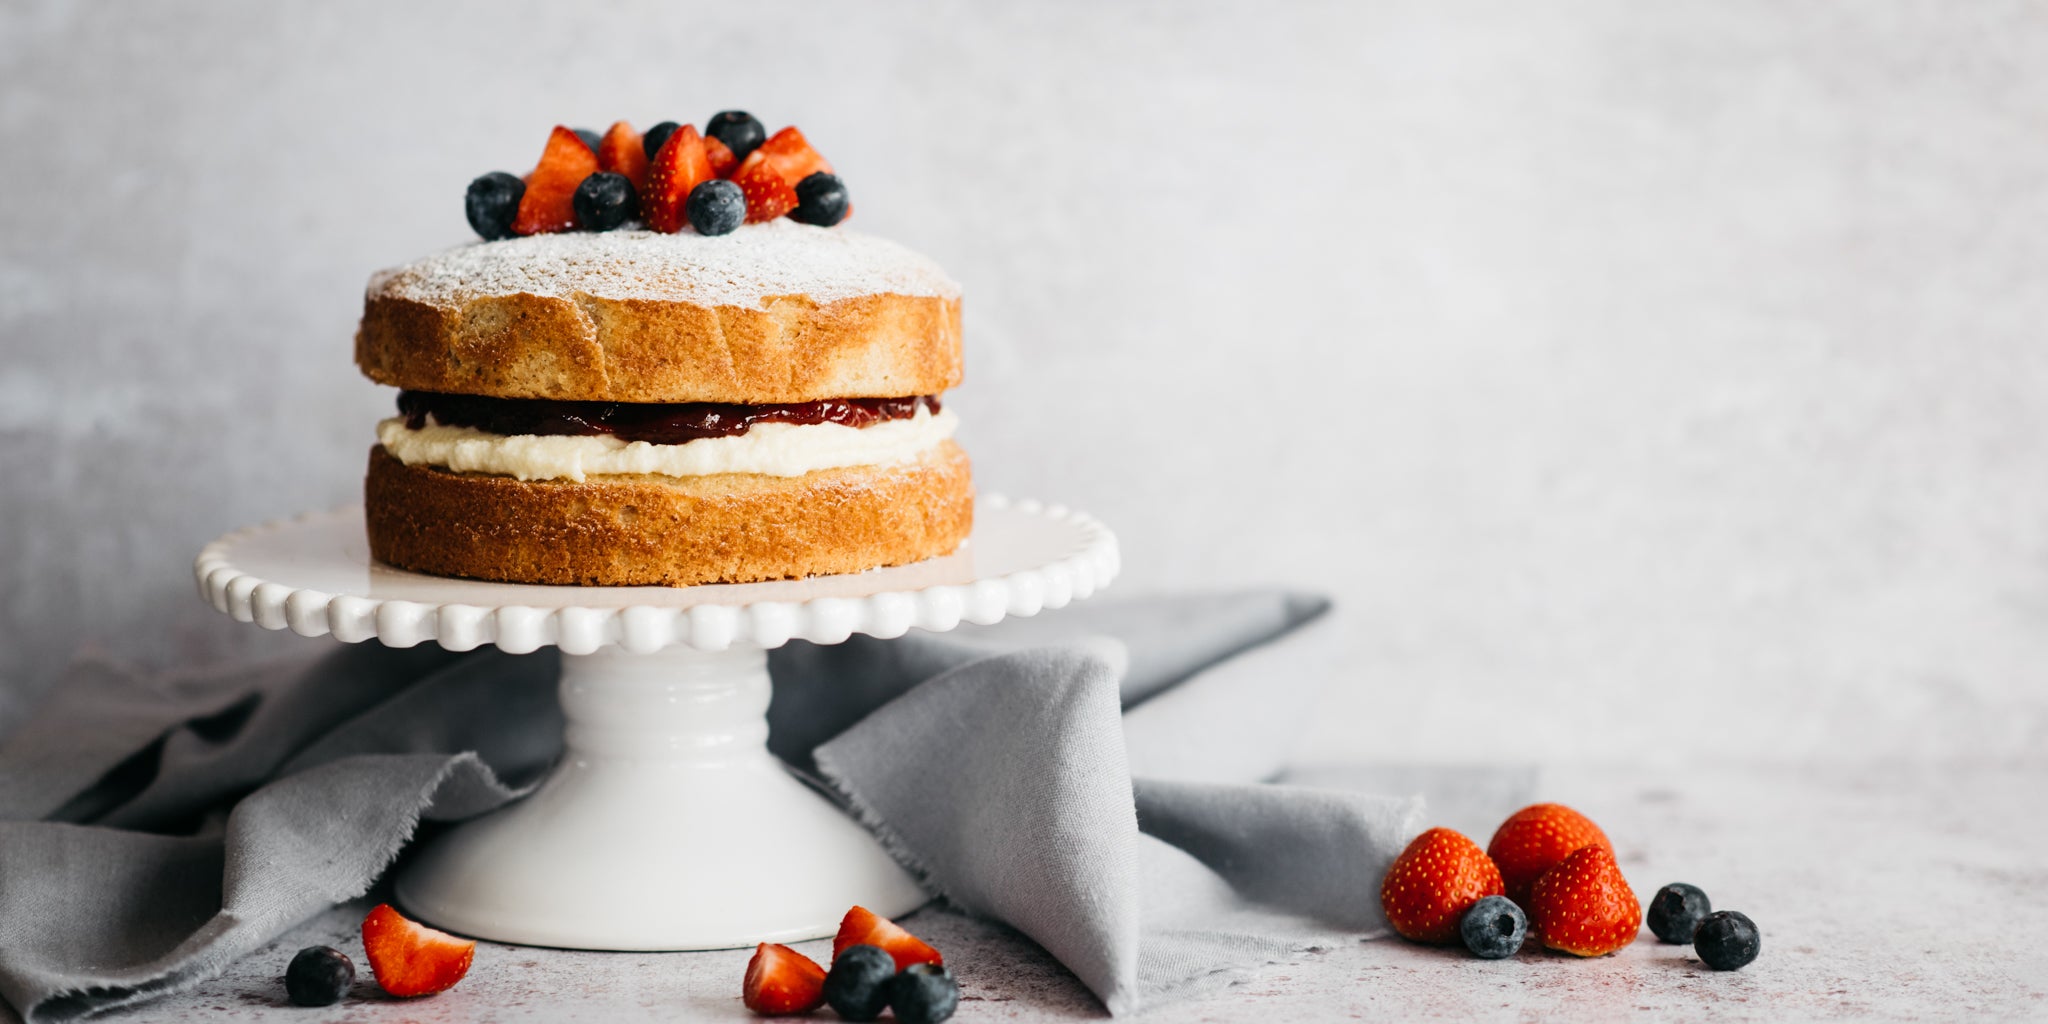 Wholemeal Victoria Sponge on a cake stand, decorated with fresh summer berries.